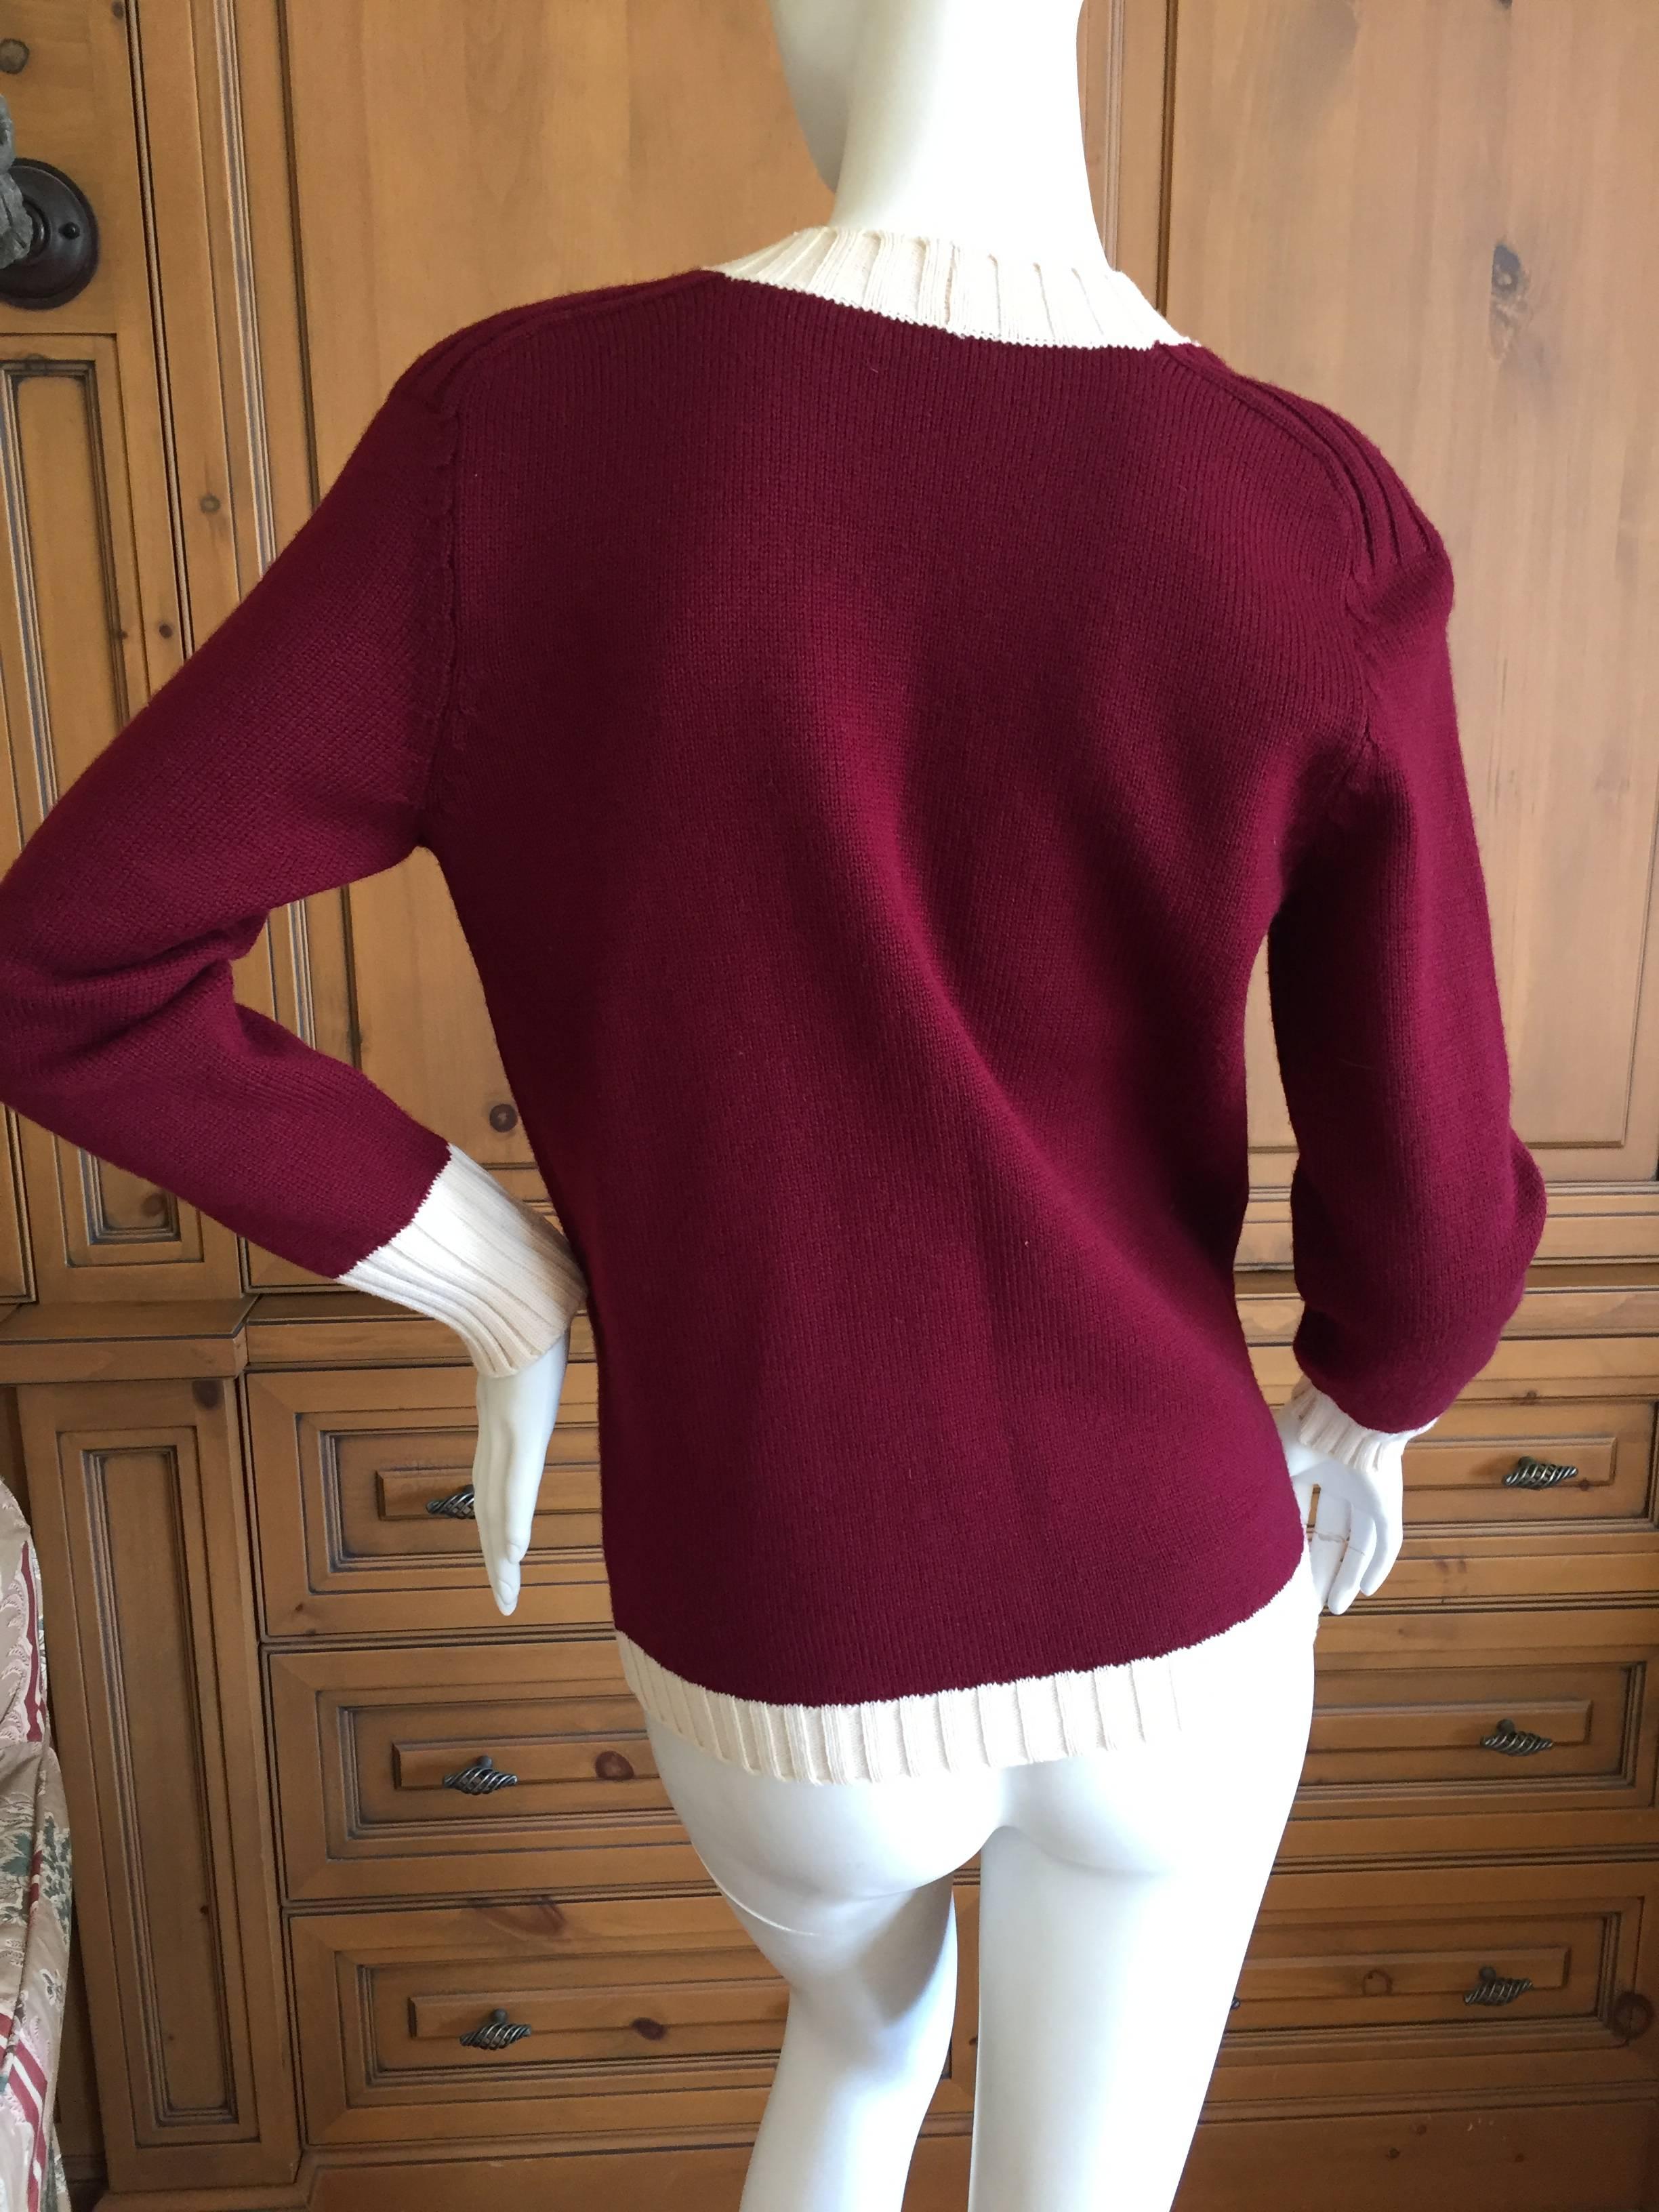 Yves Saint Laurent 1970's Burgundy Cardigan Sweater In Excellent Condition For Sale In Cloverdale, CA